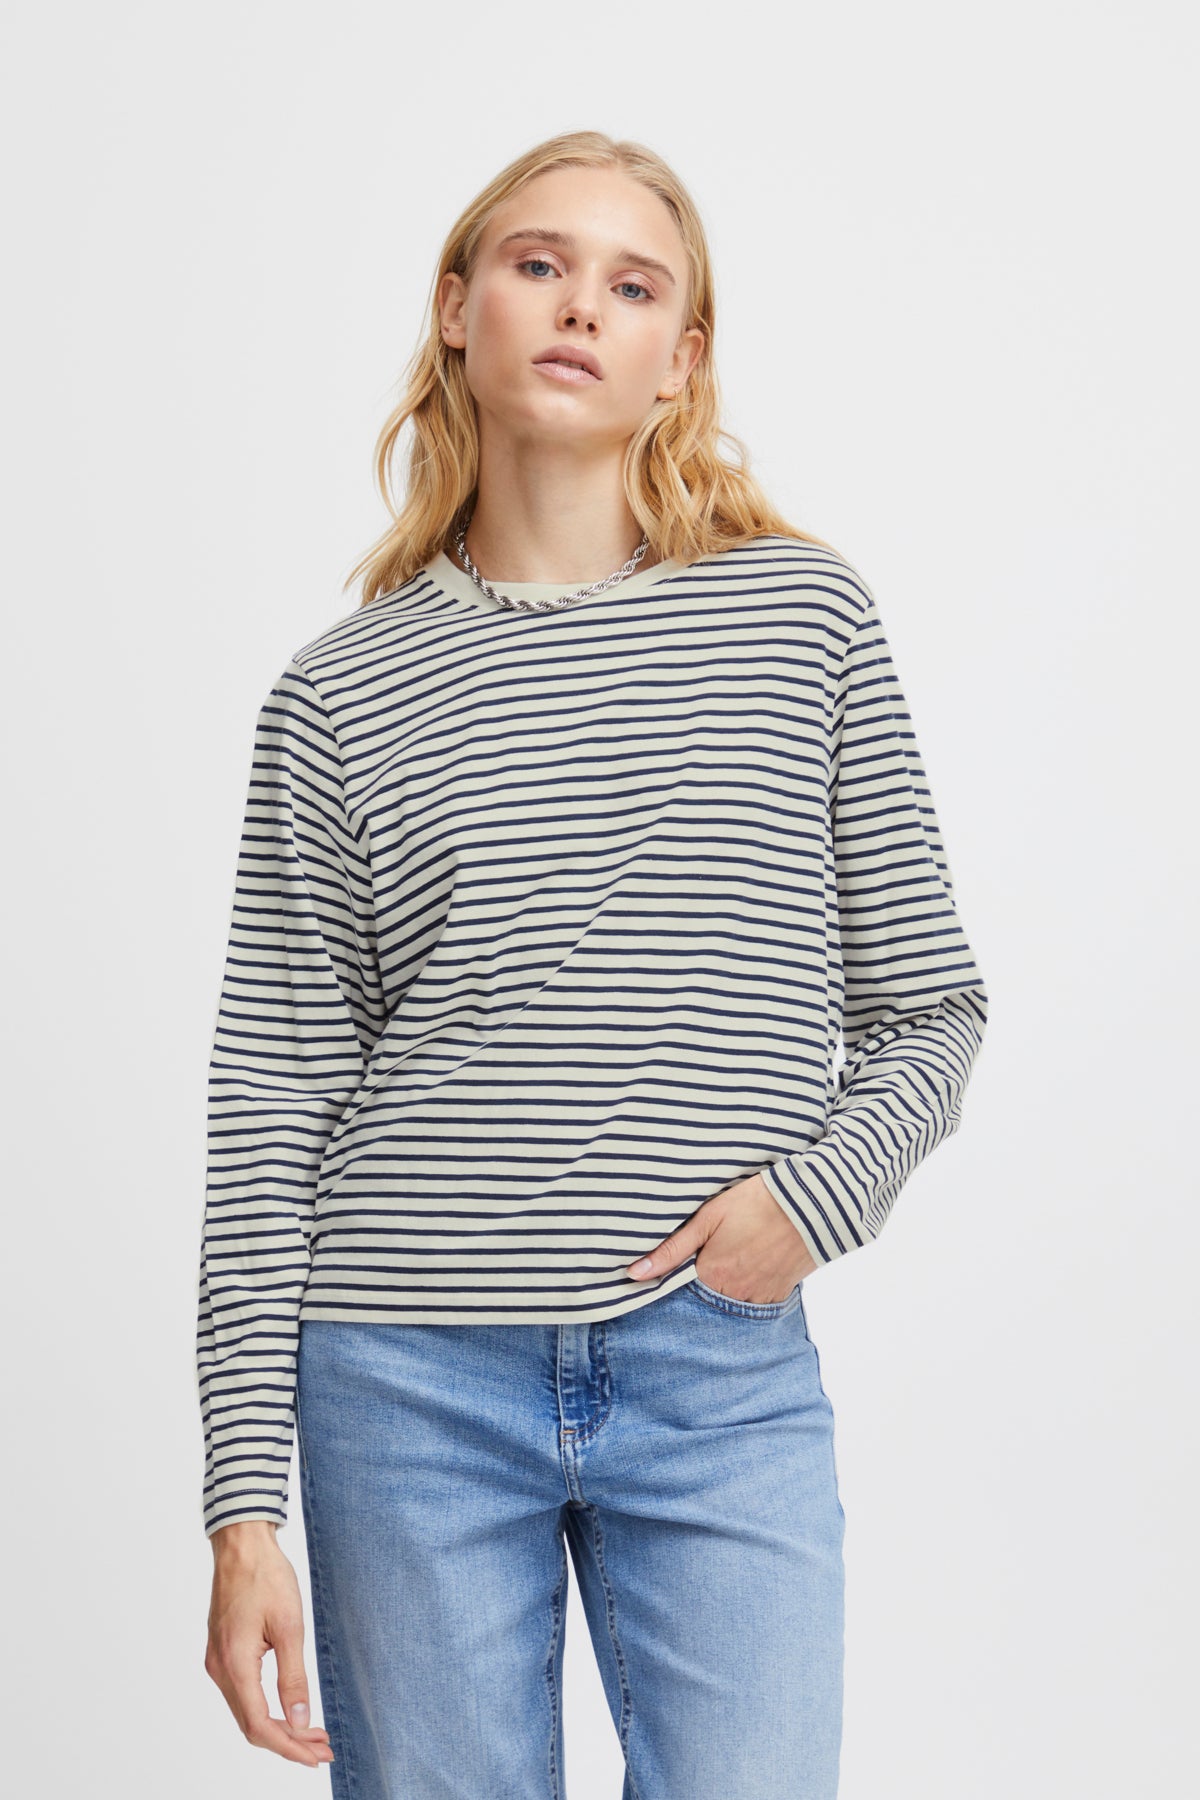 Mira Striped T-Shirt in Total Eclipse